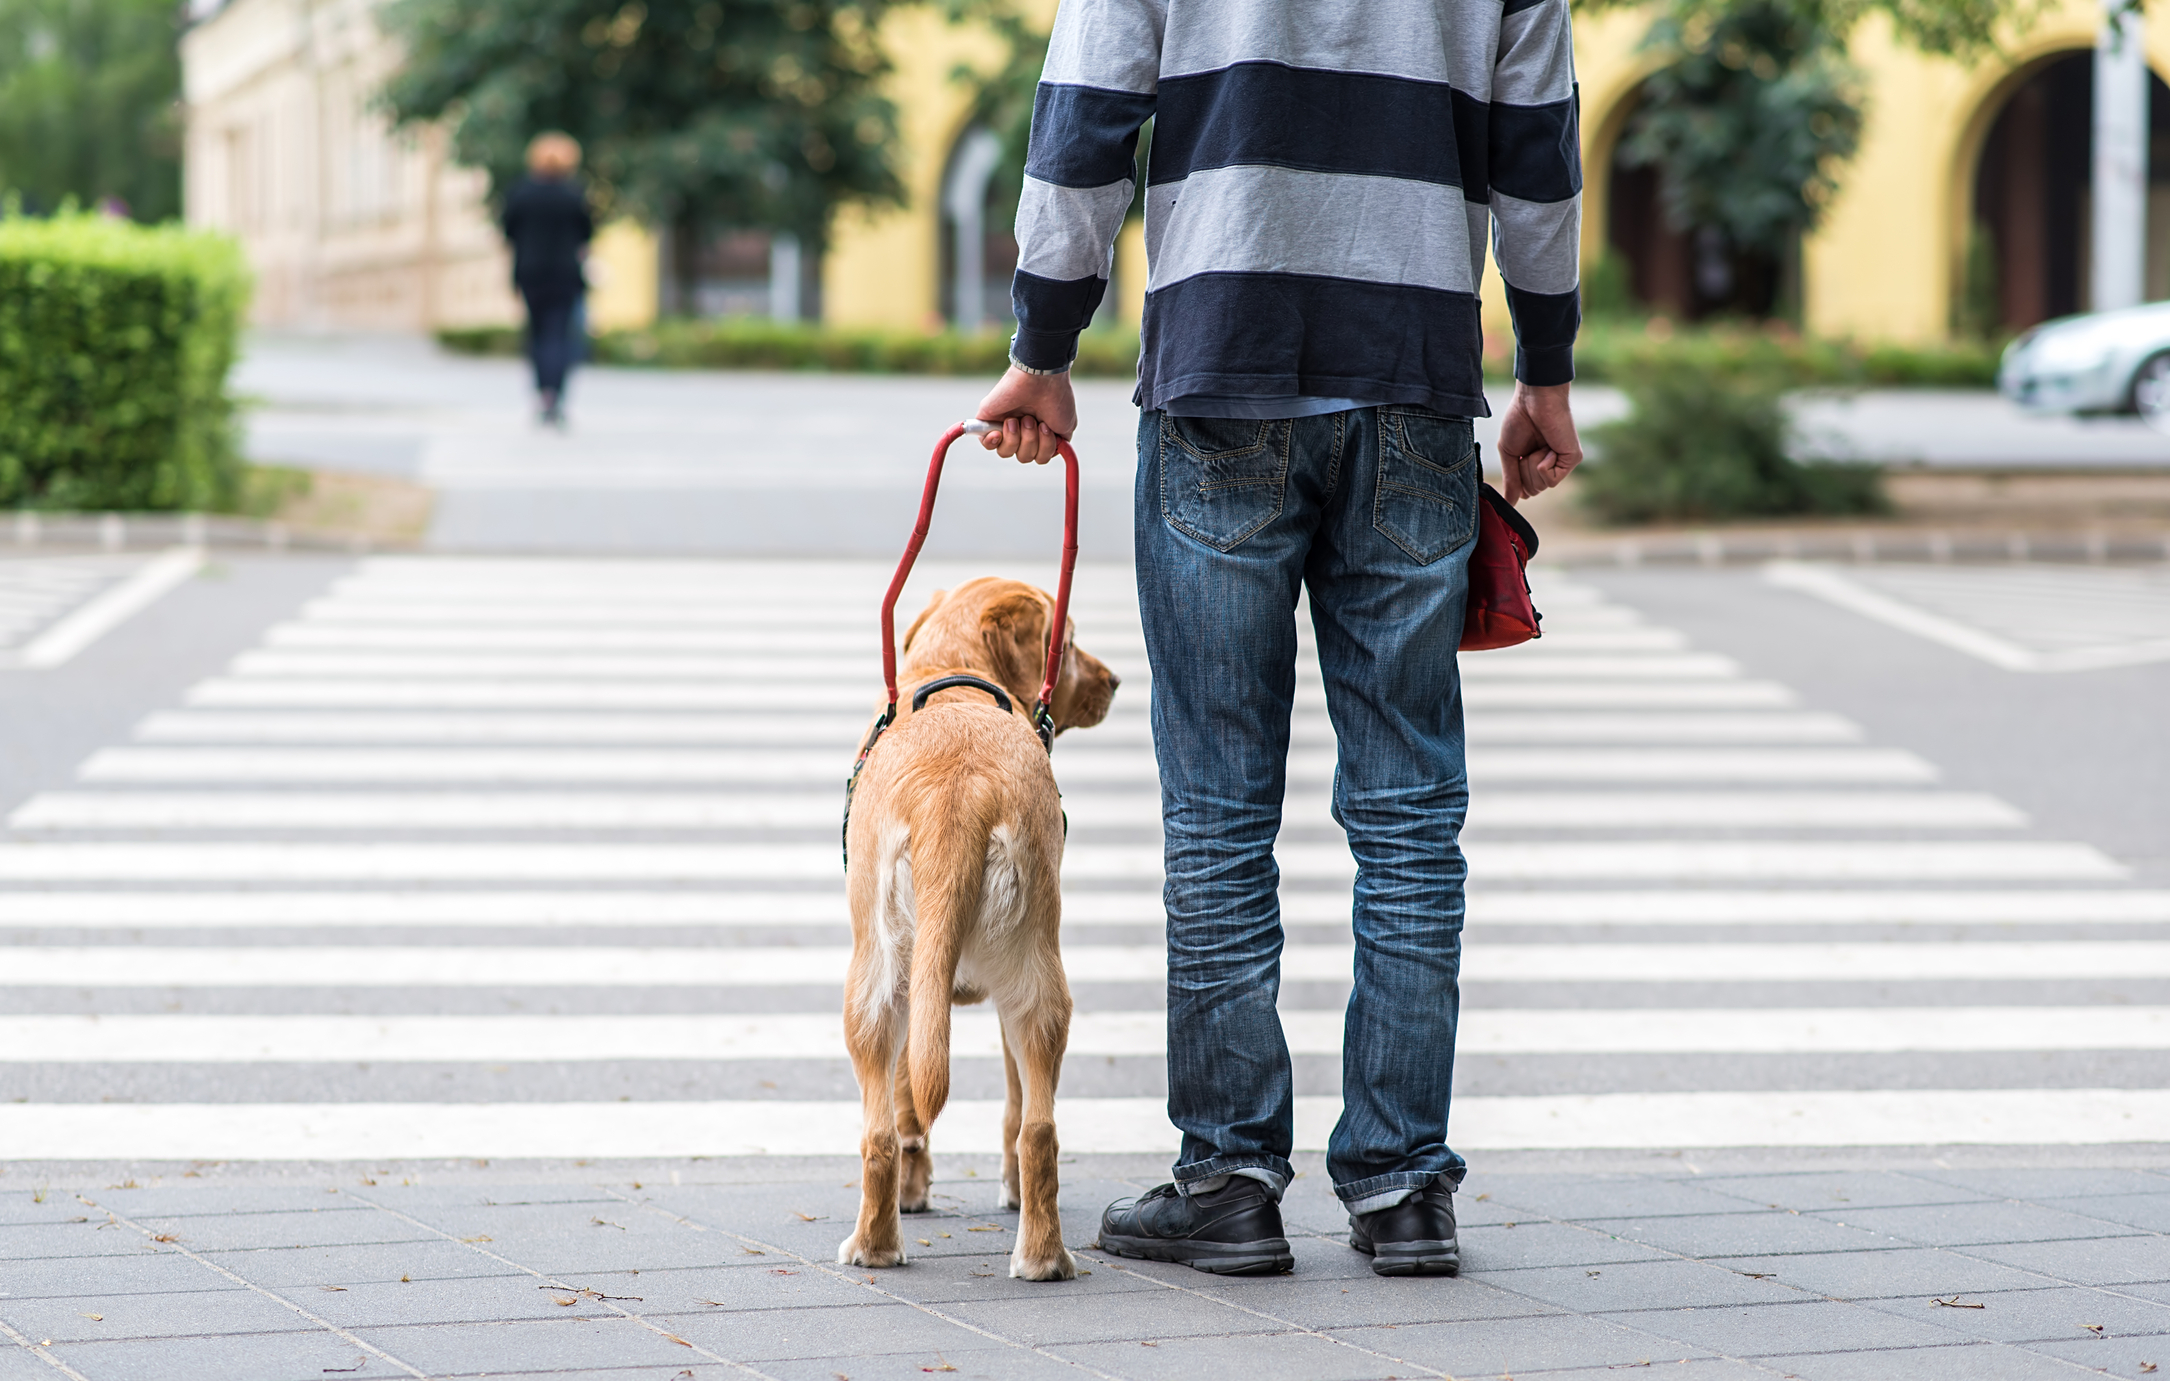 Romania passes law allowing guide dogs to accompany people with disabilities in all public spaces